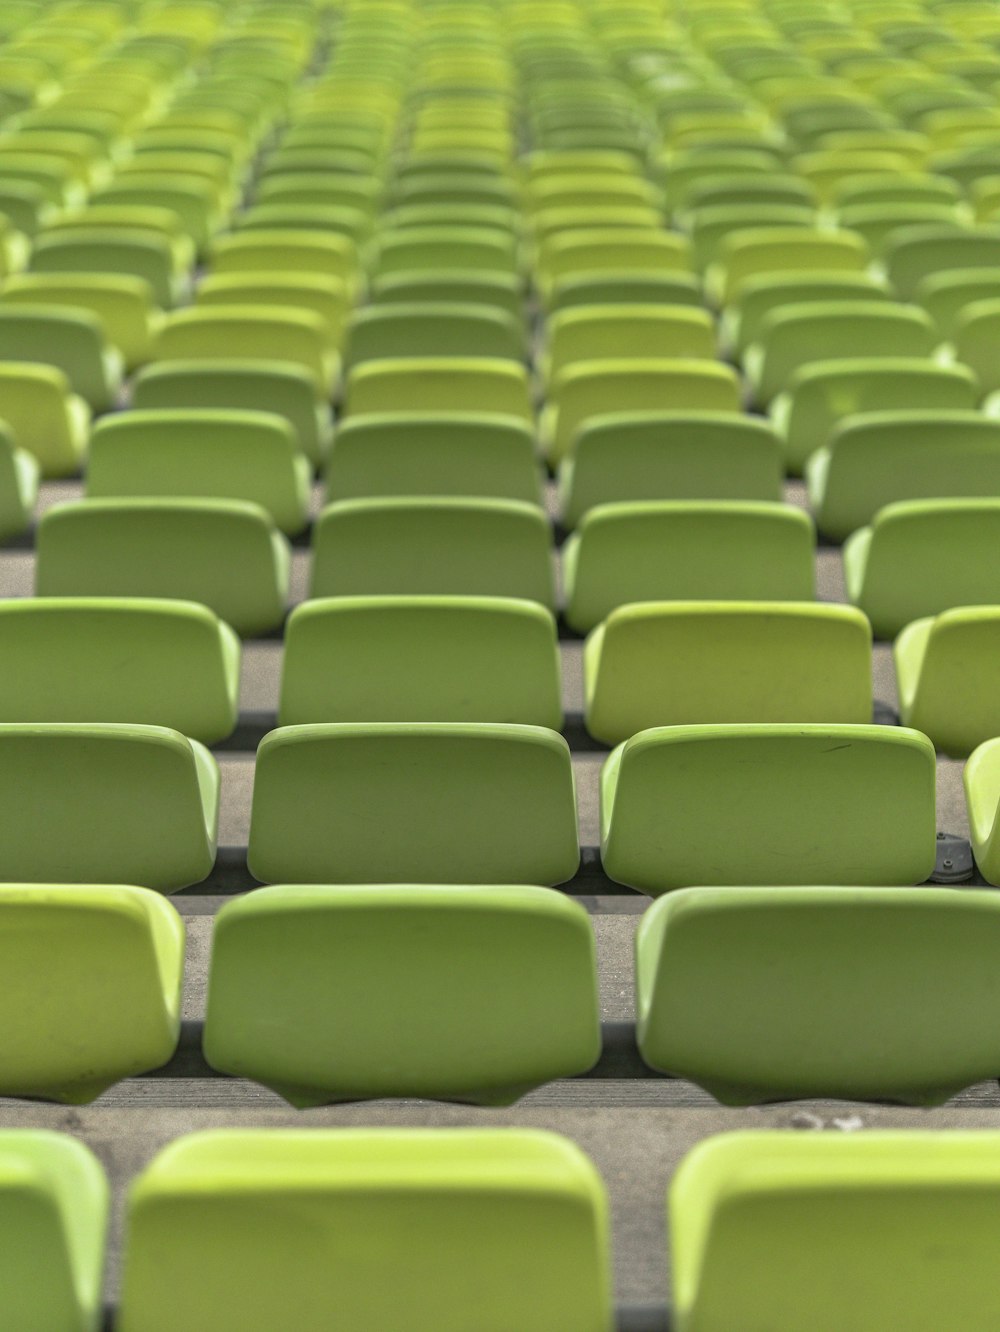 rows of green plastic seats in a stadium